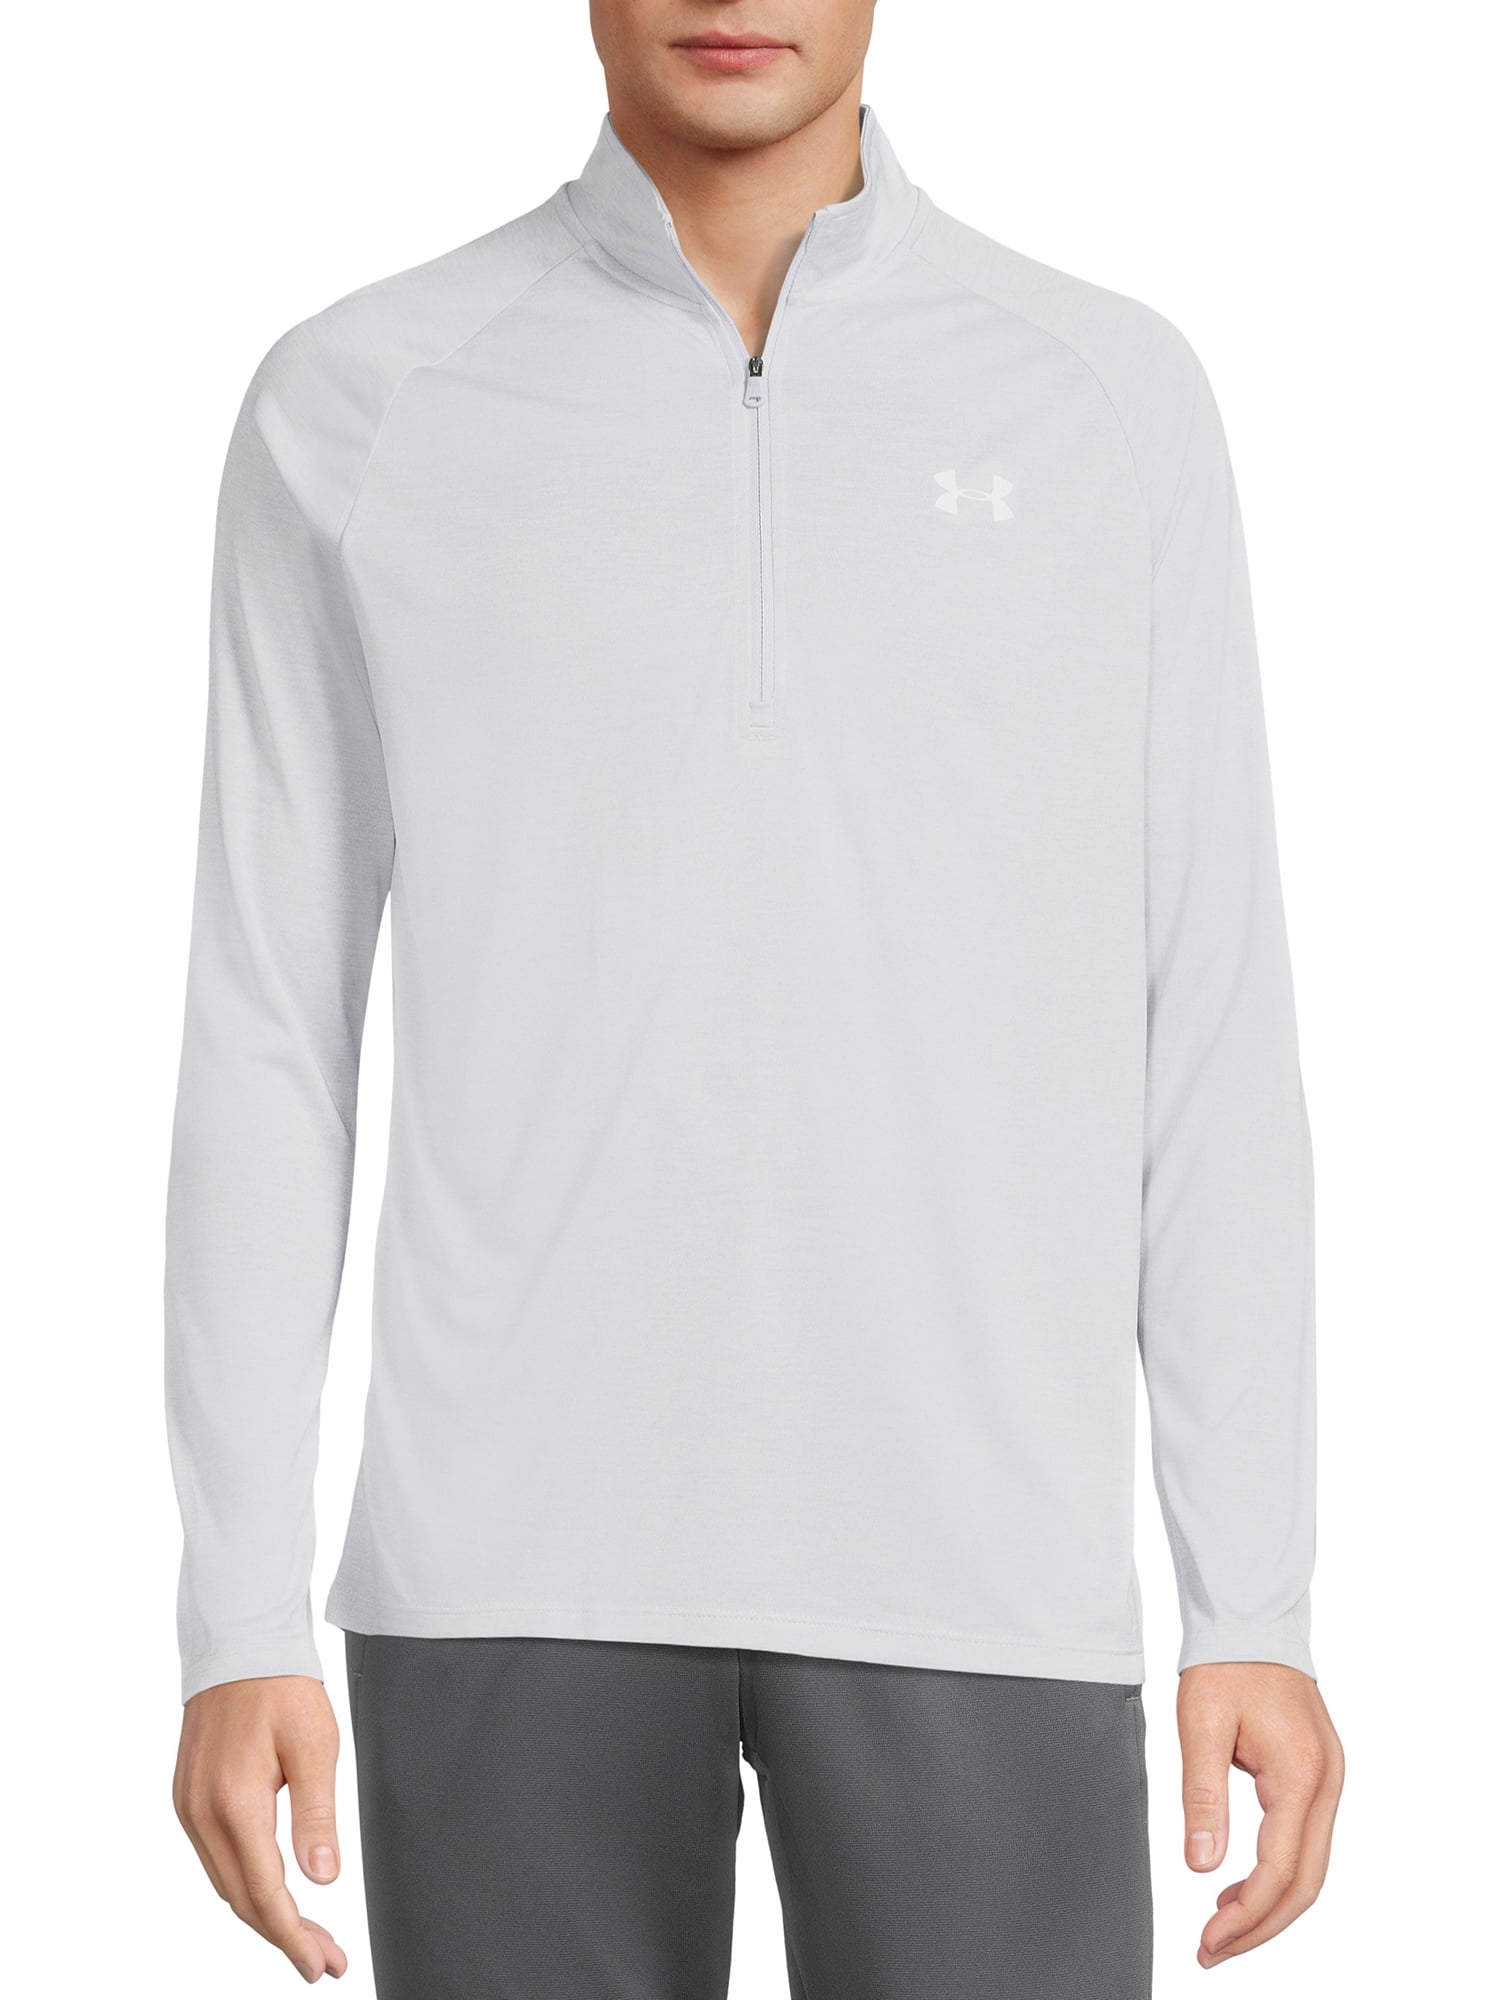 Under Armour Men's and Big Men's UA Tech Half Zip Pullover with Long  Sleeves, Sizes up to 2XL - Walmart.com